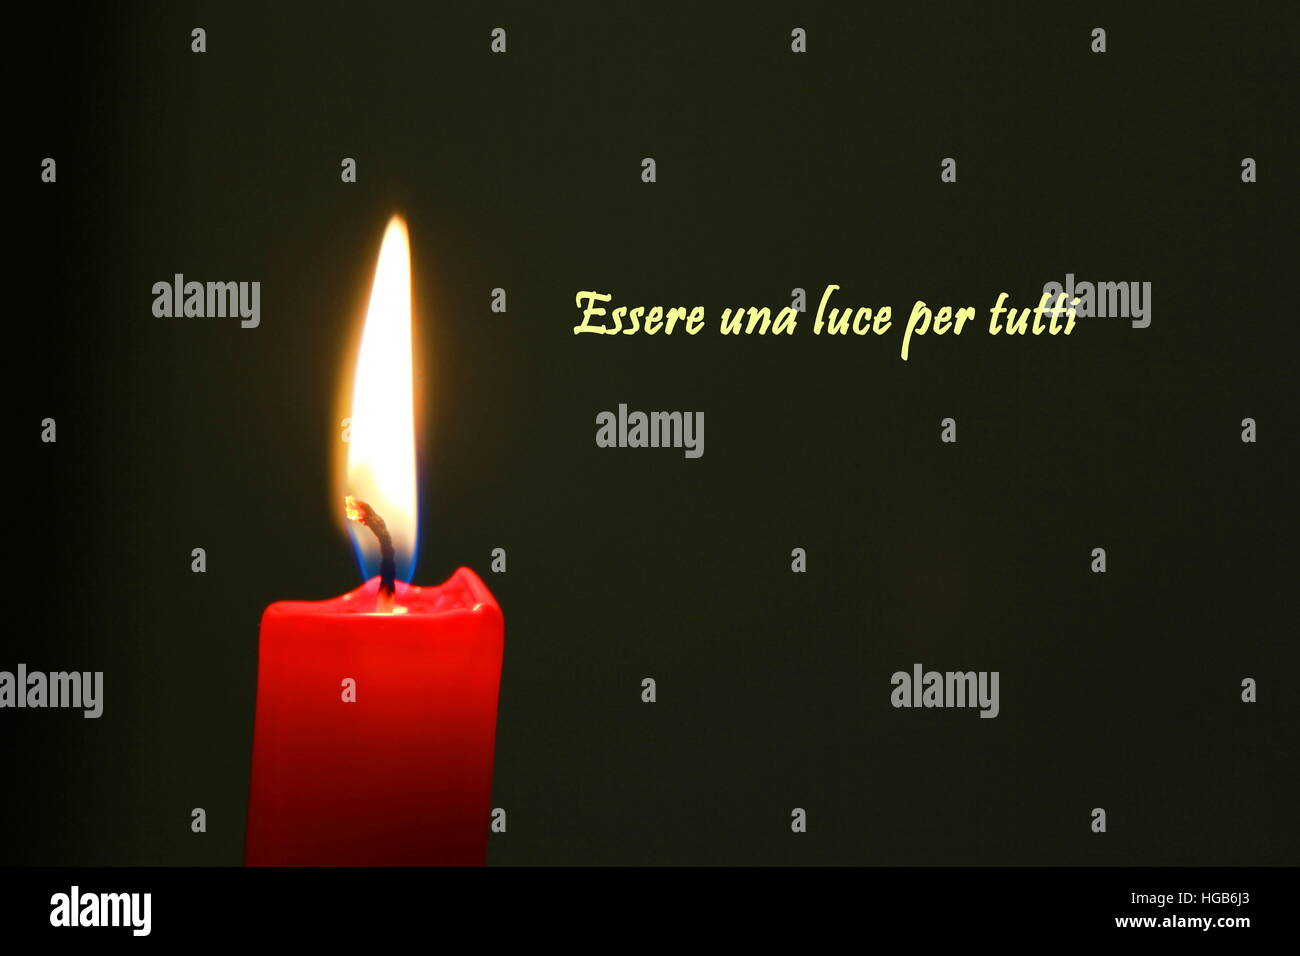 Red candle with flame on black background with italian text Stock Photo